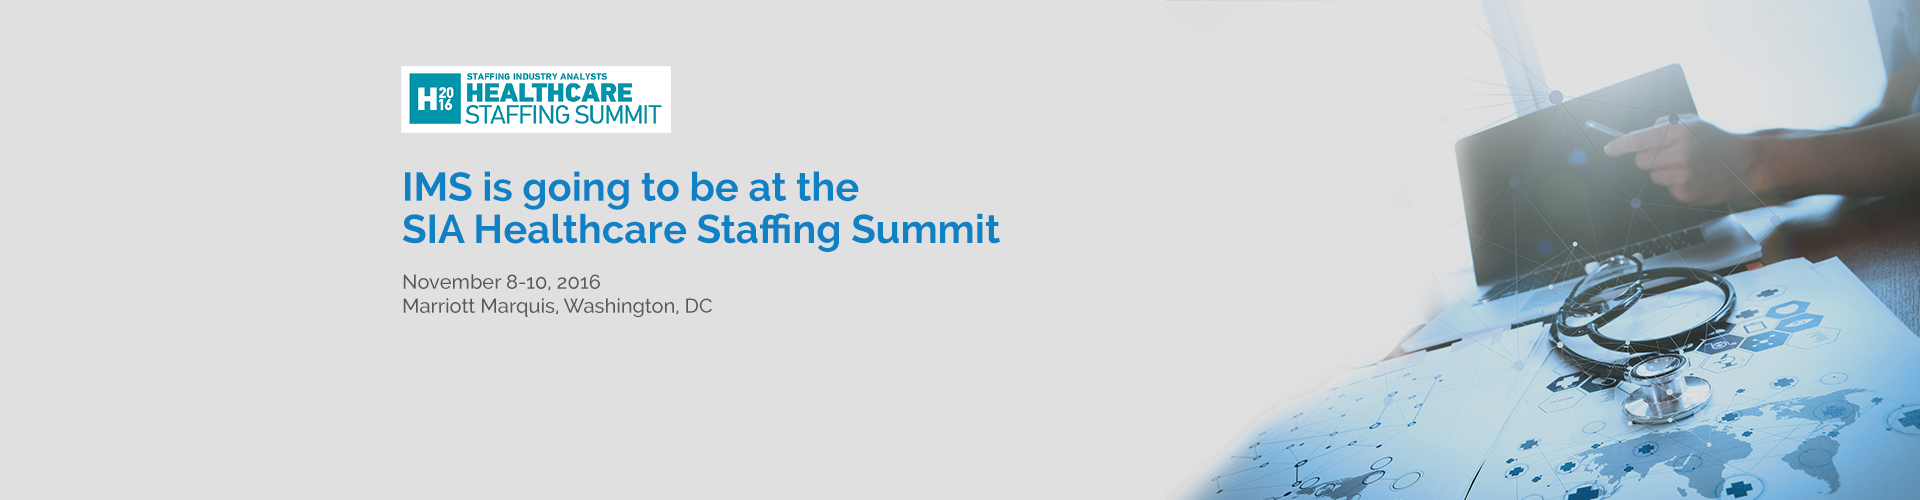 Meet us at the SIA Healthcare Staffing Summit 2016